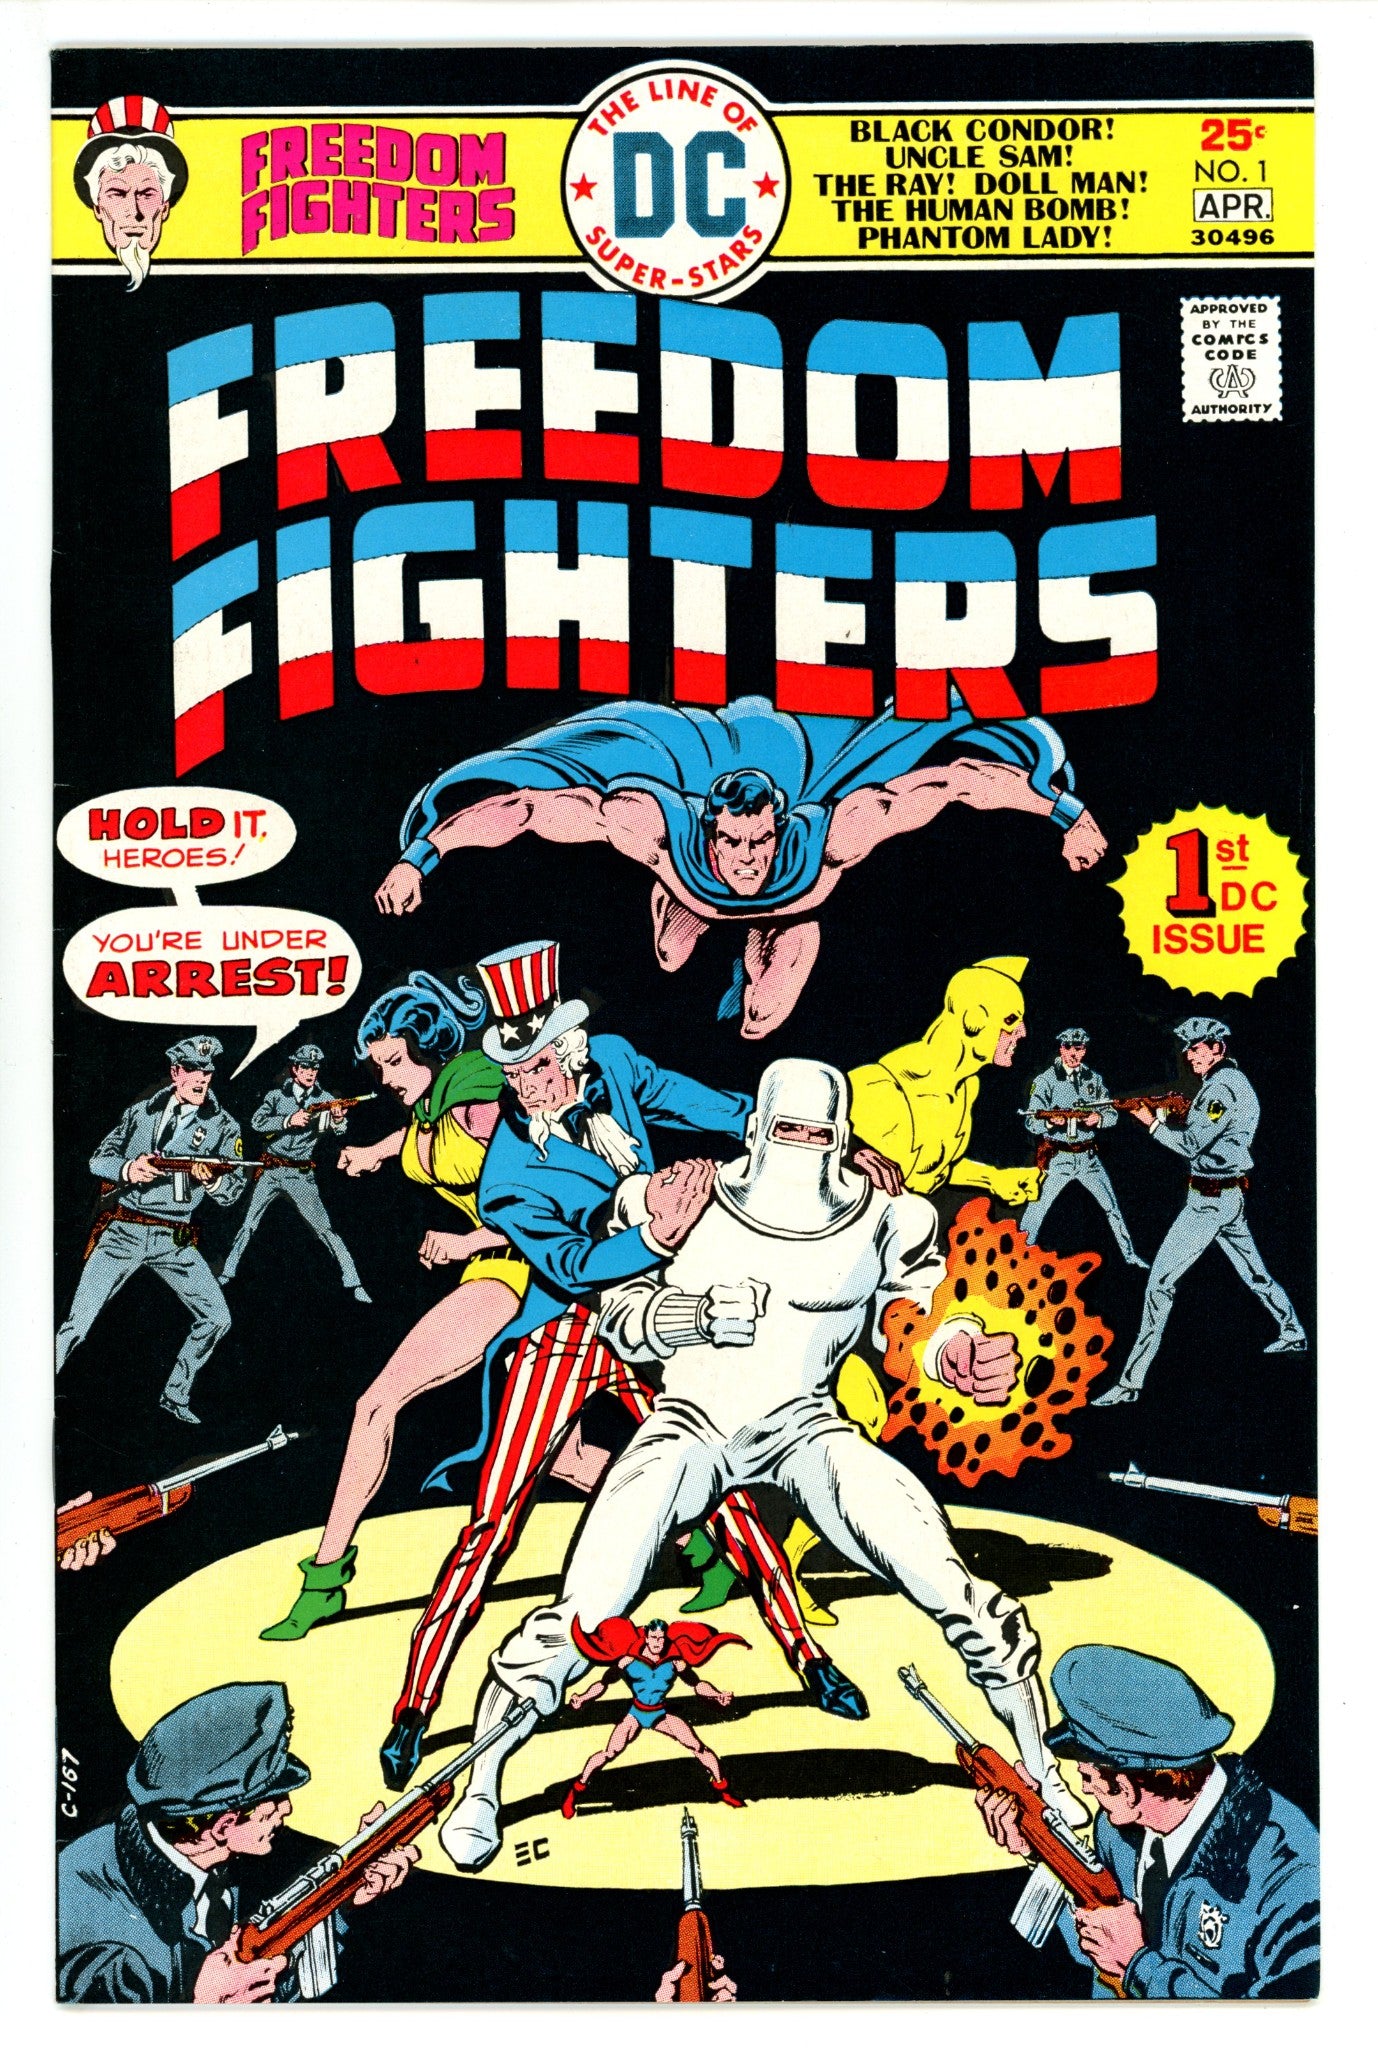 Freedom Fighters Vol 1 1 VF (8.0) (1976) 